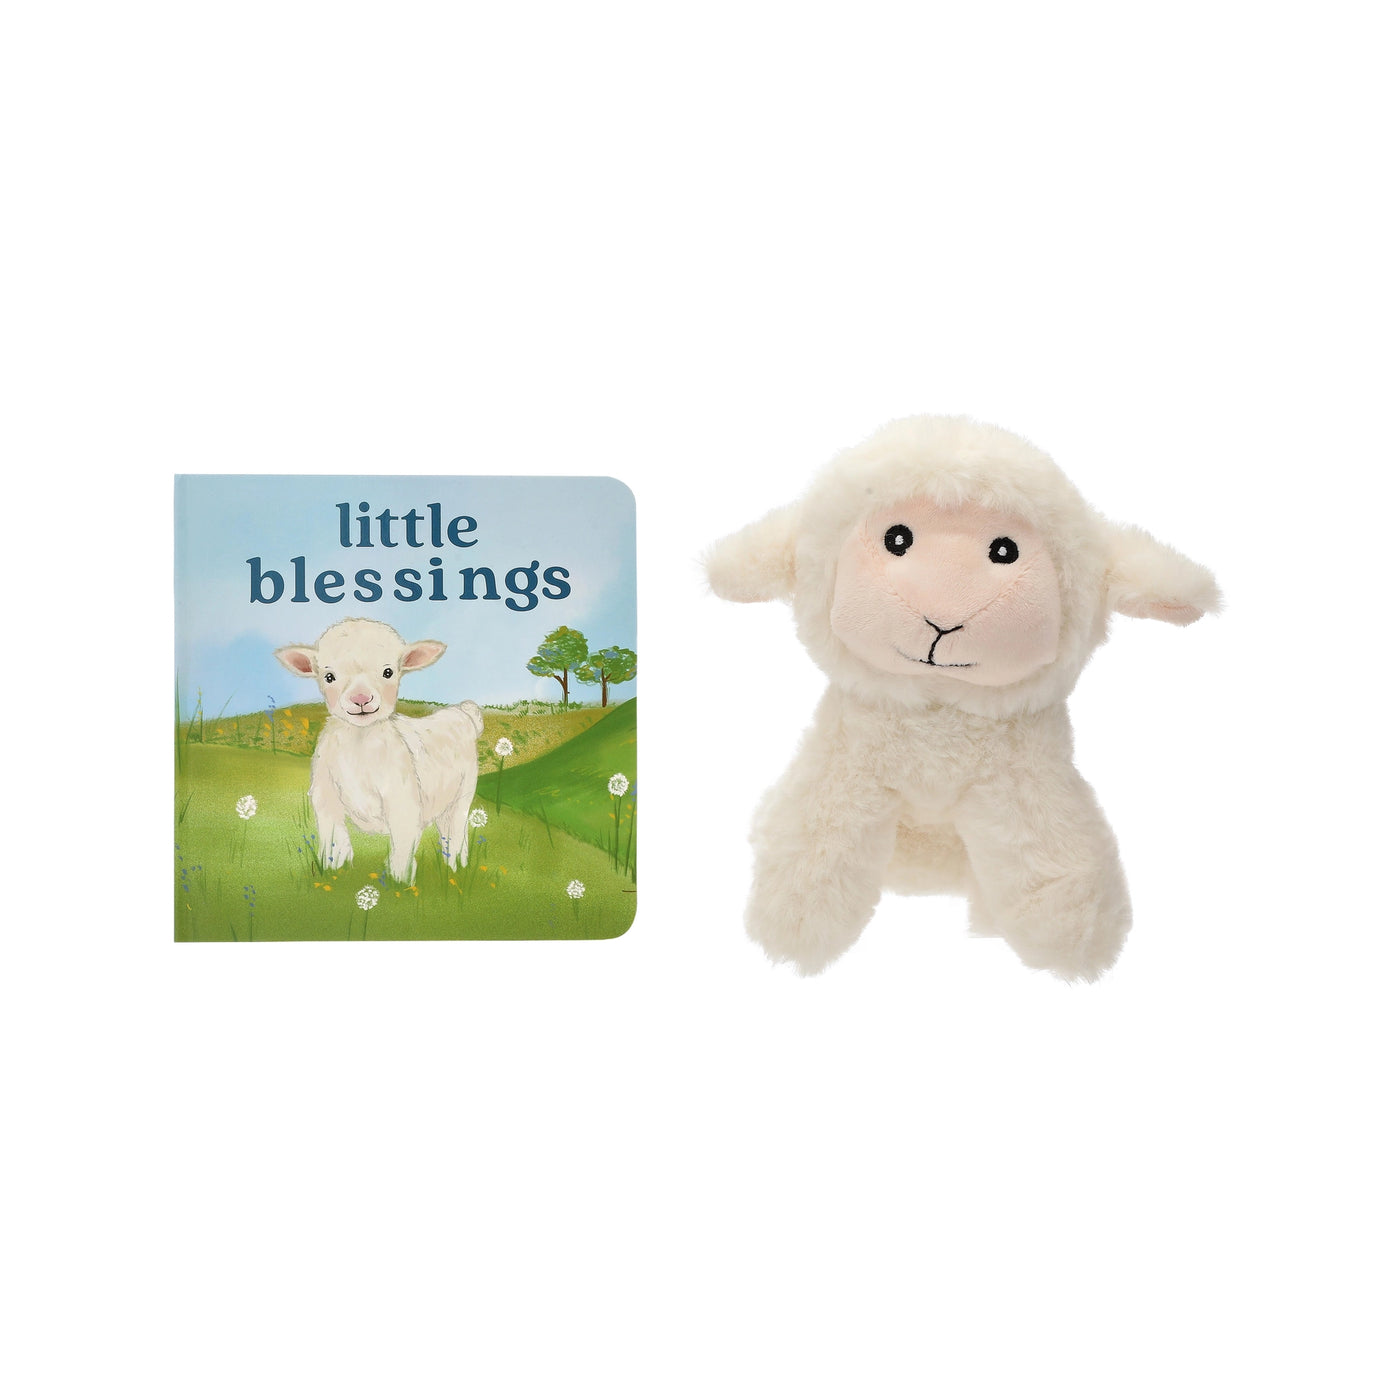 little blessings board book and lamb